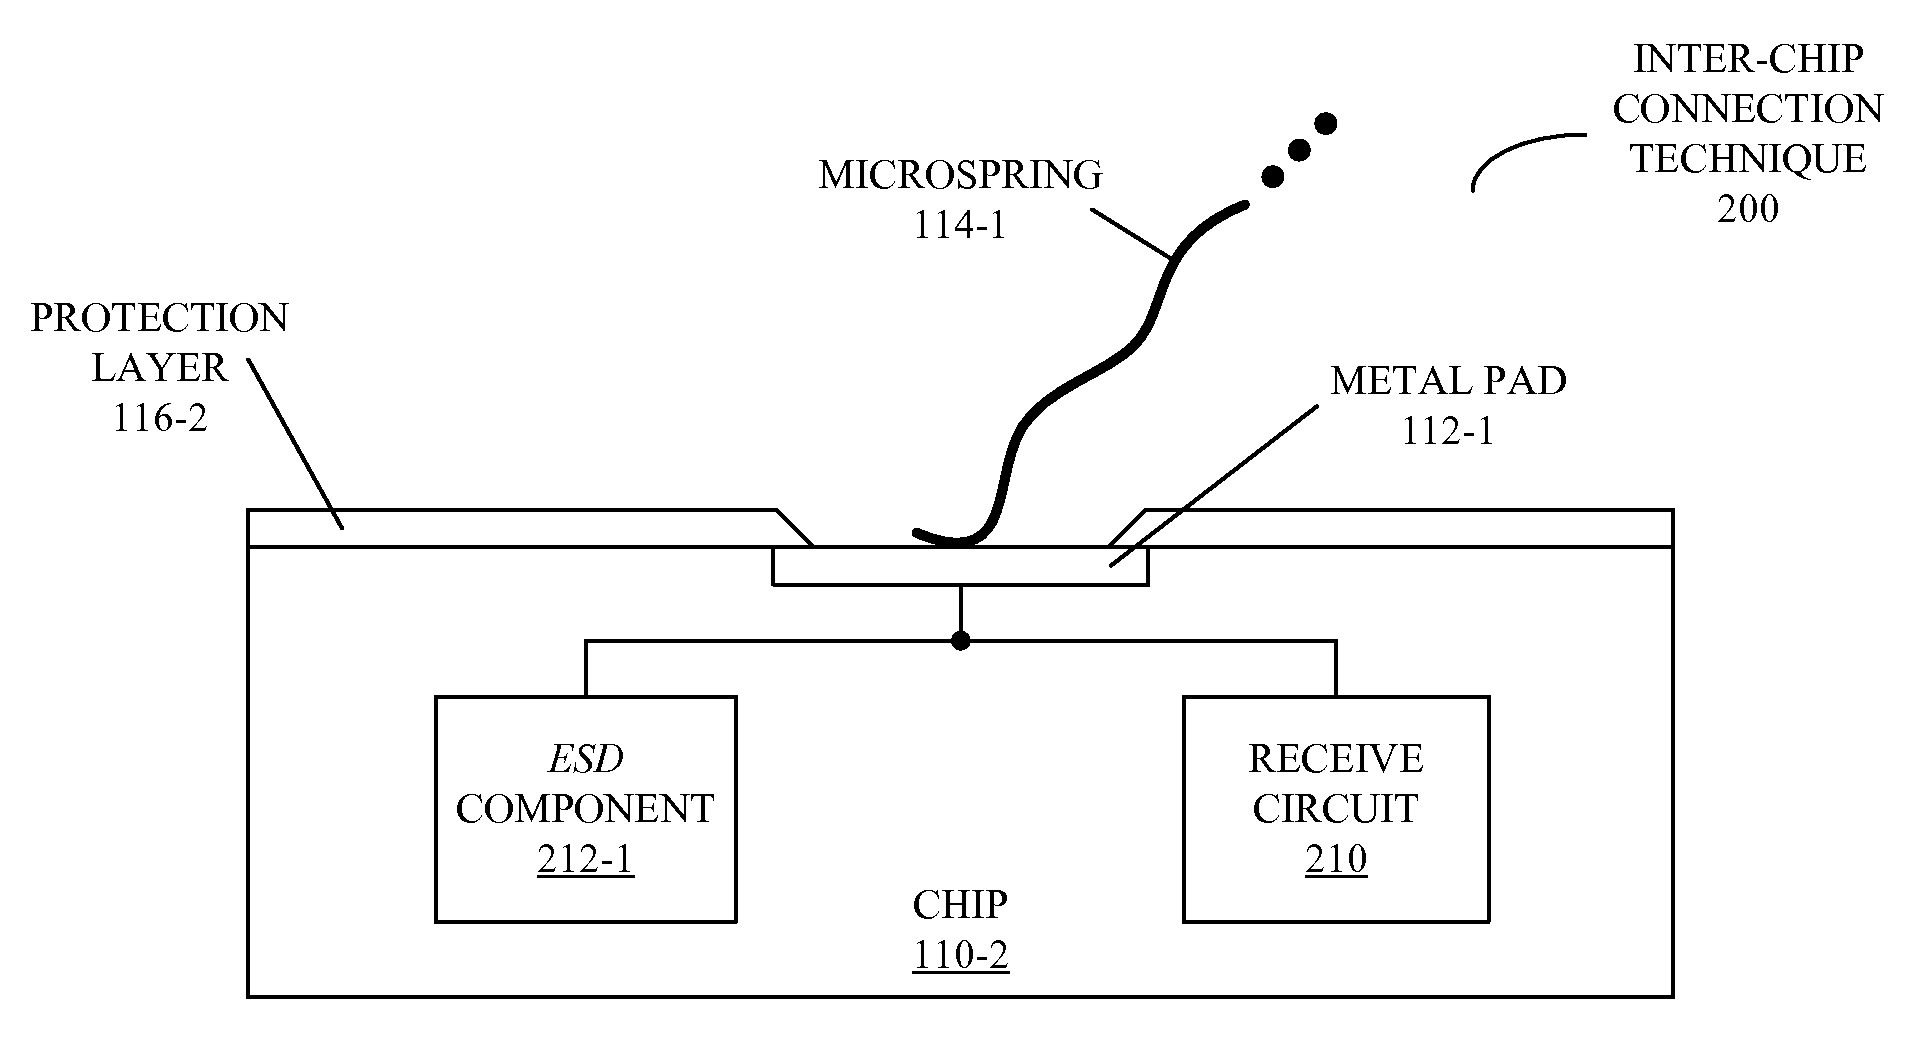 Receive circuit for connectors with variable complex impedance